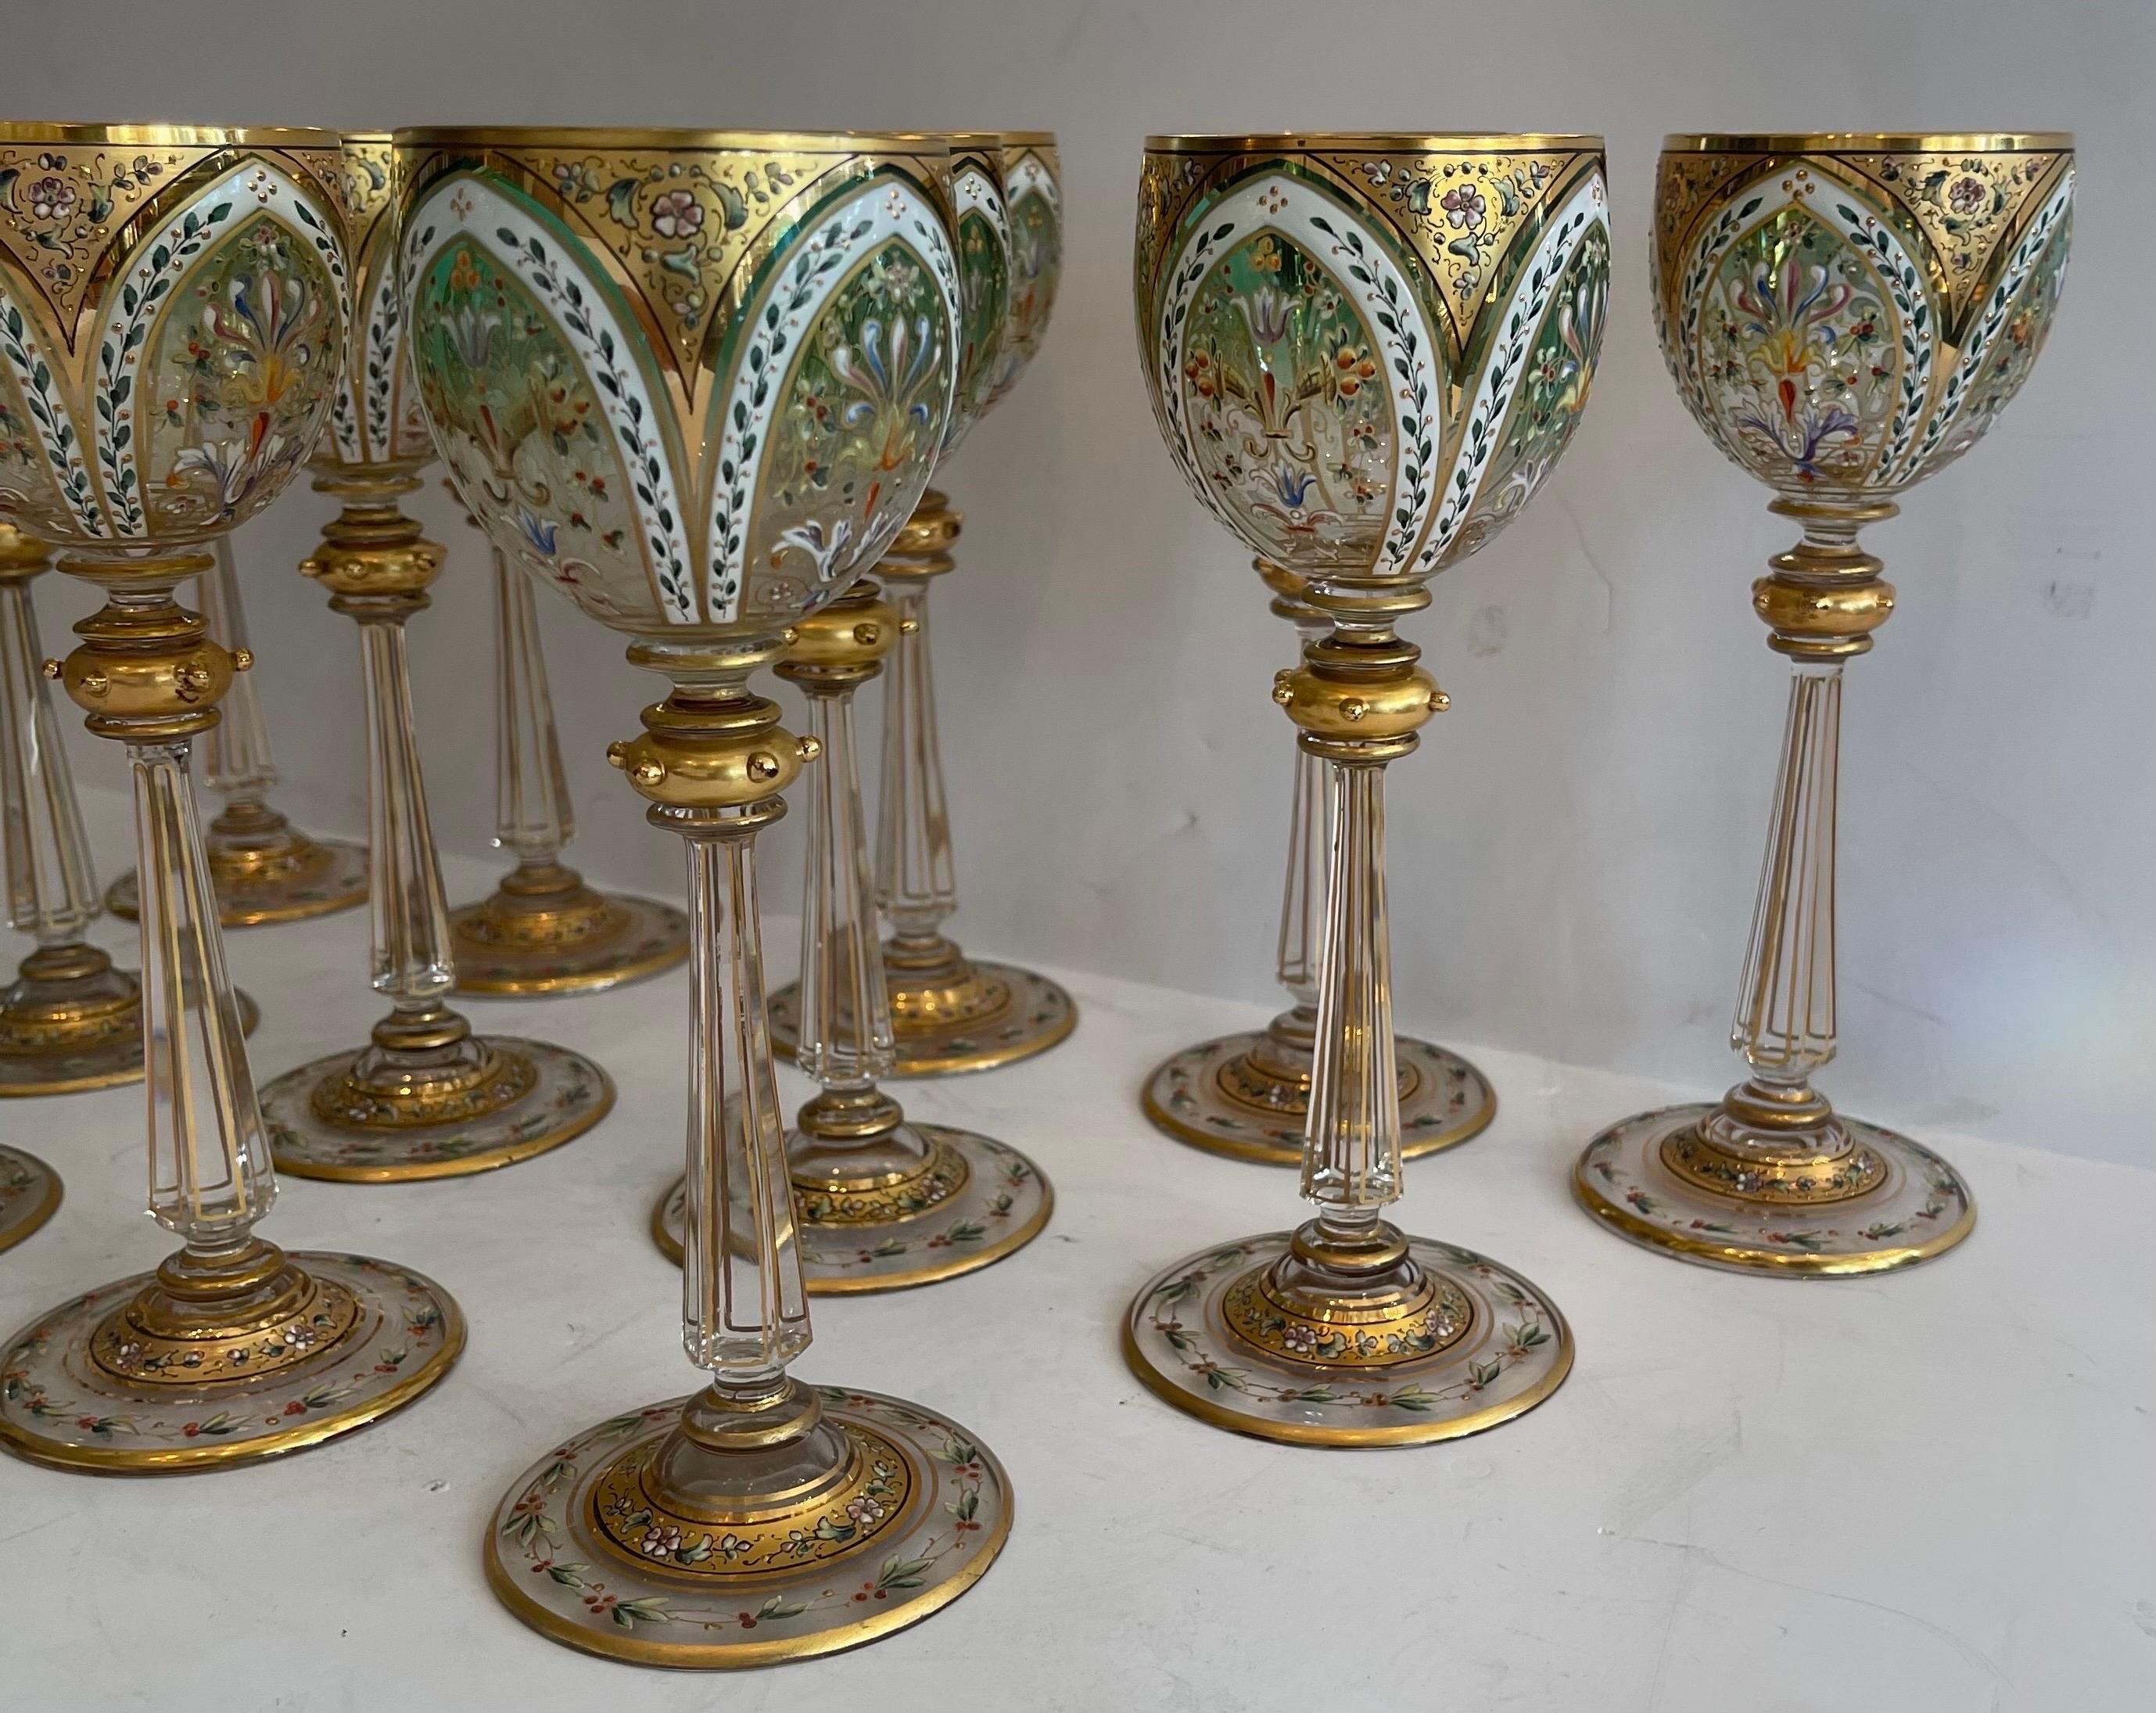 A Wonderful Service Of 12 Moser Aesthetic Hand Painted Enameled Flower Bouquet Cut To Clear Crystal Glasses, One With Tiny Flea Bite.
In Excellent Unused Collectors Condition.